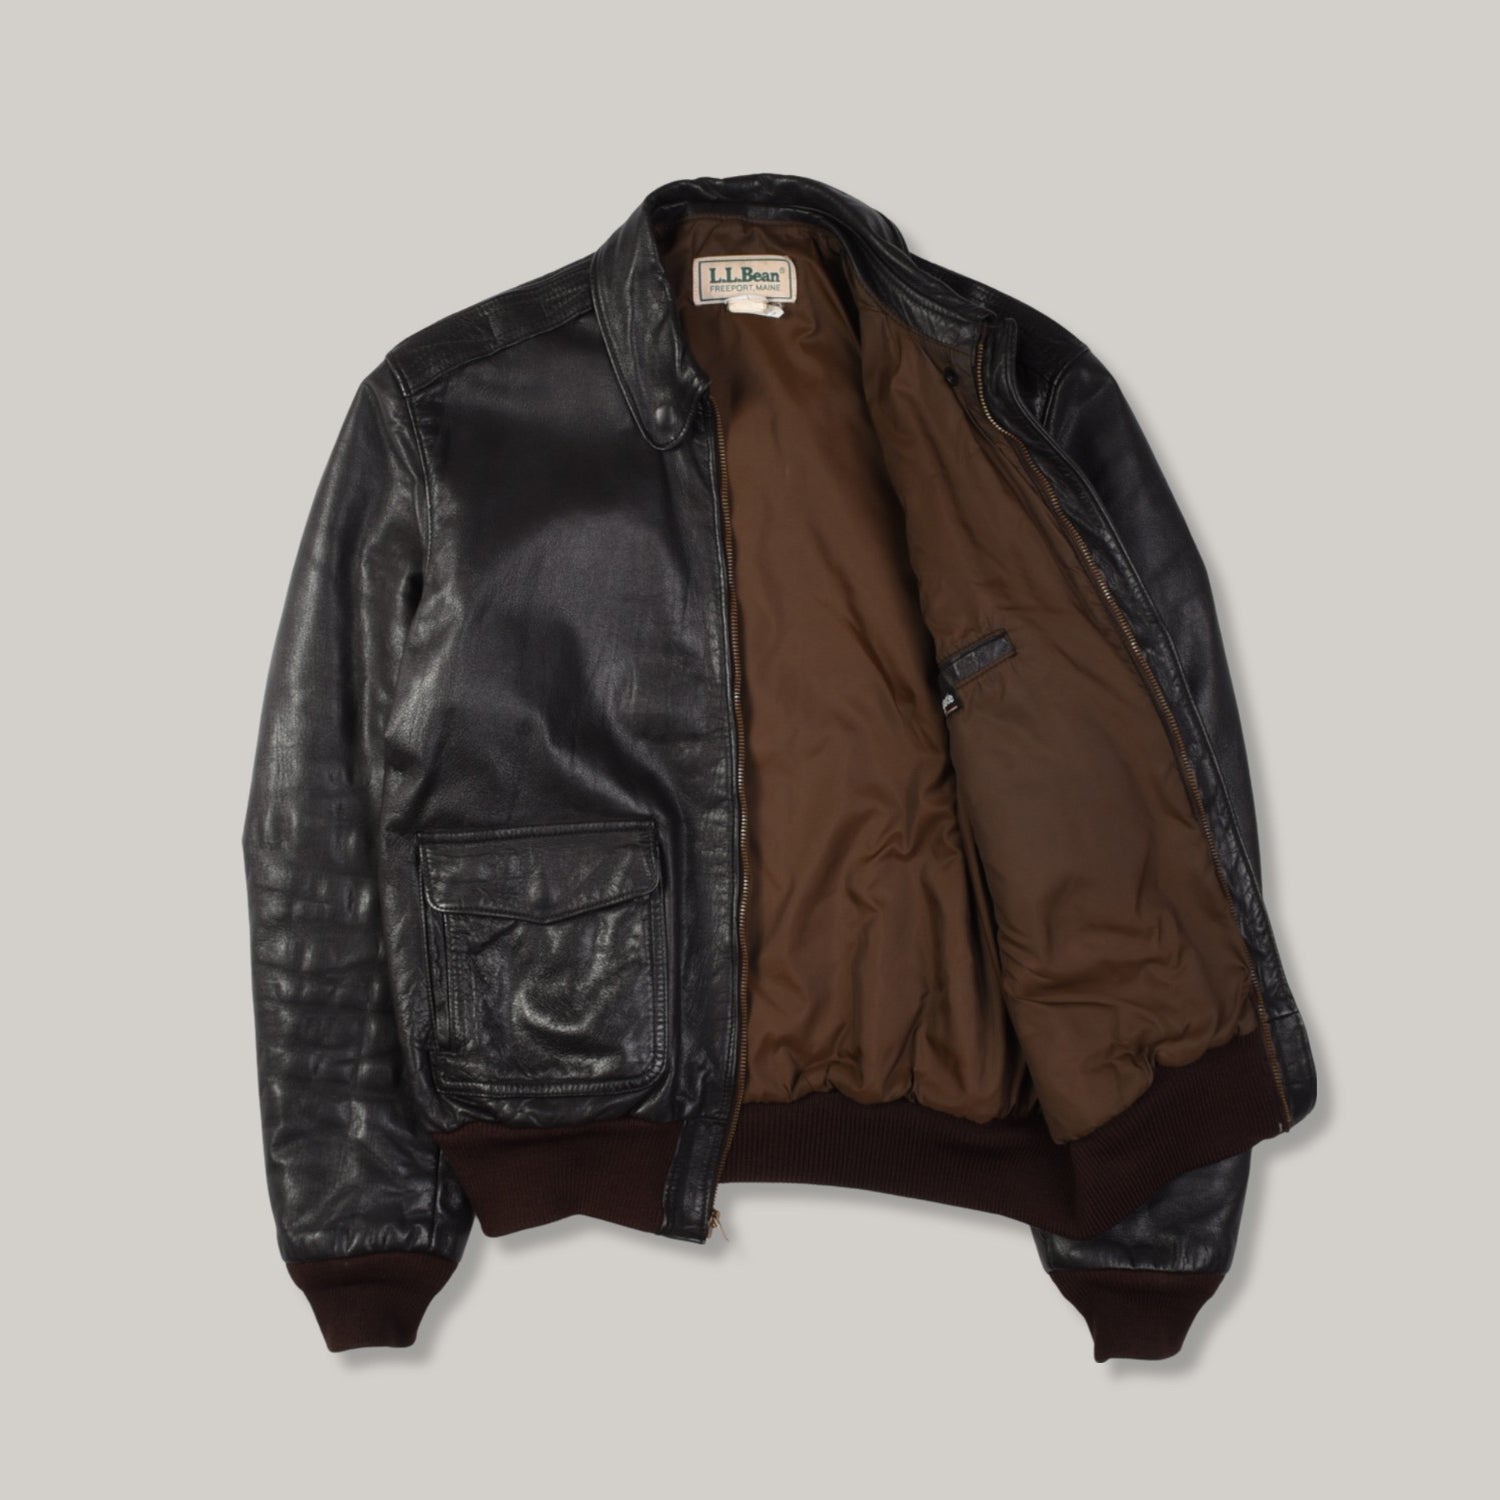 LEATHER JACKETS – Pickings and Parry